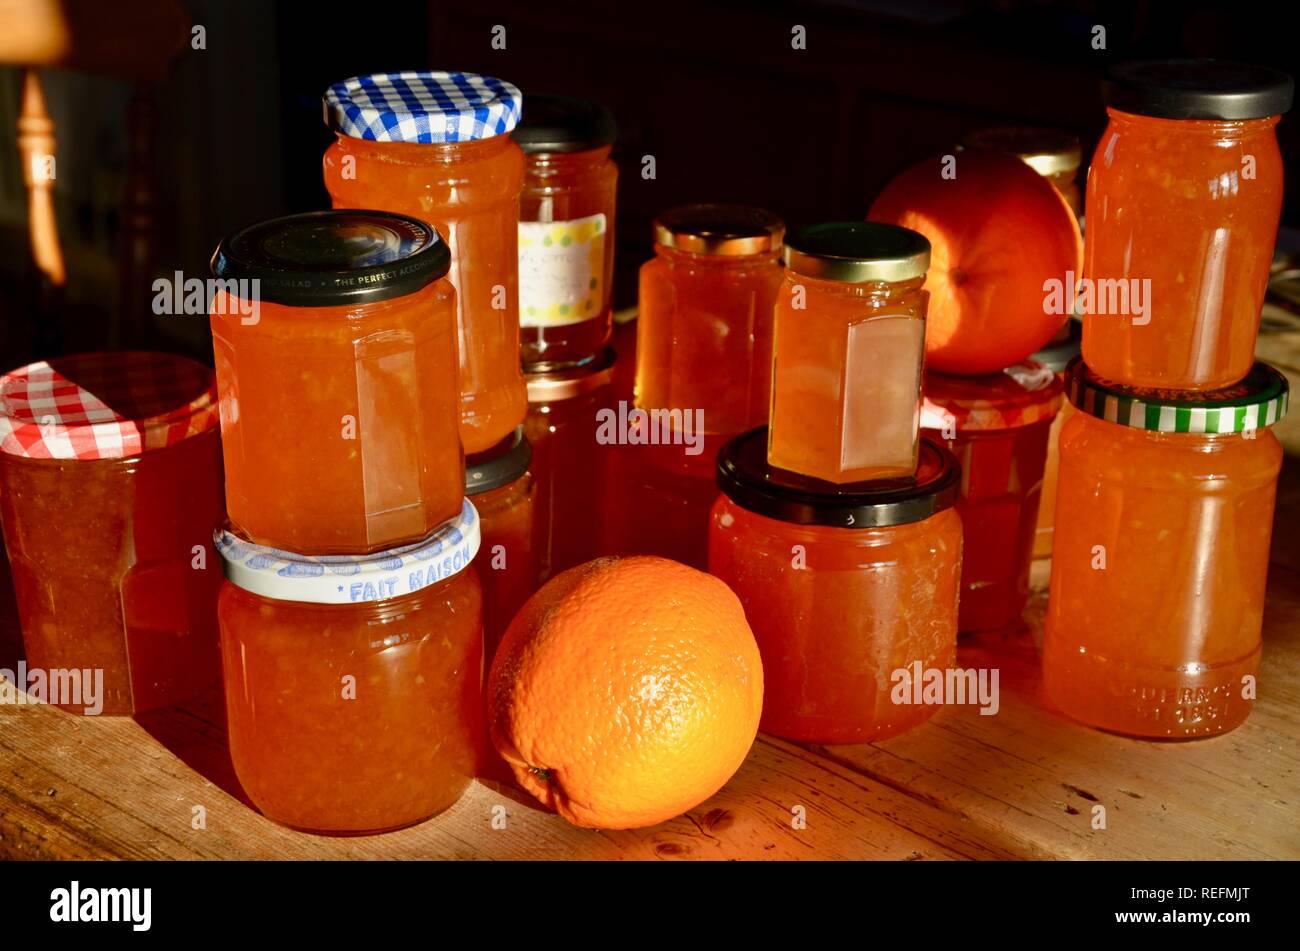 Home made Seville orange marmalade in jars on wooden table Stock Photo